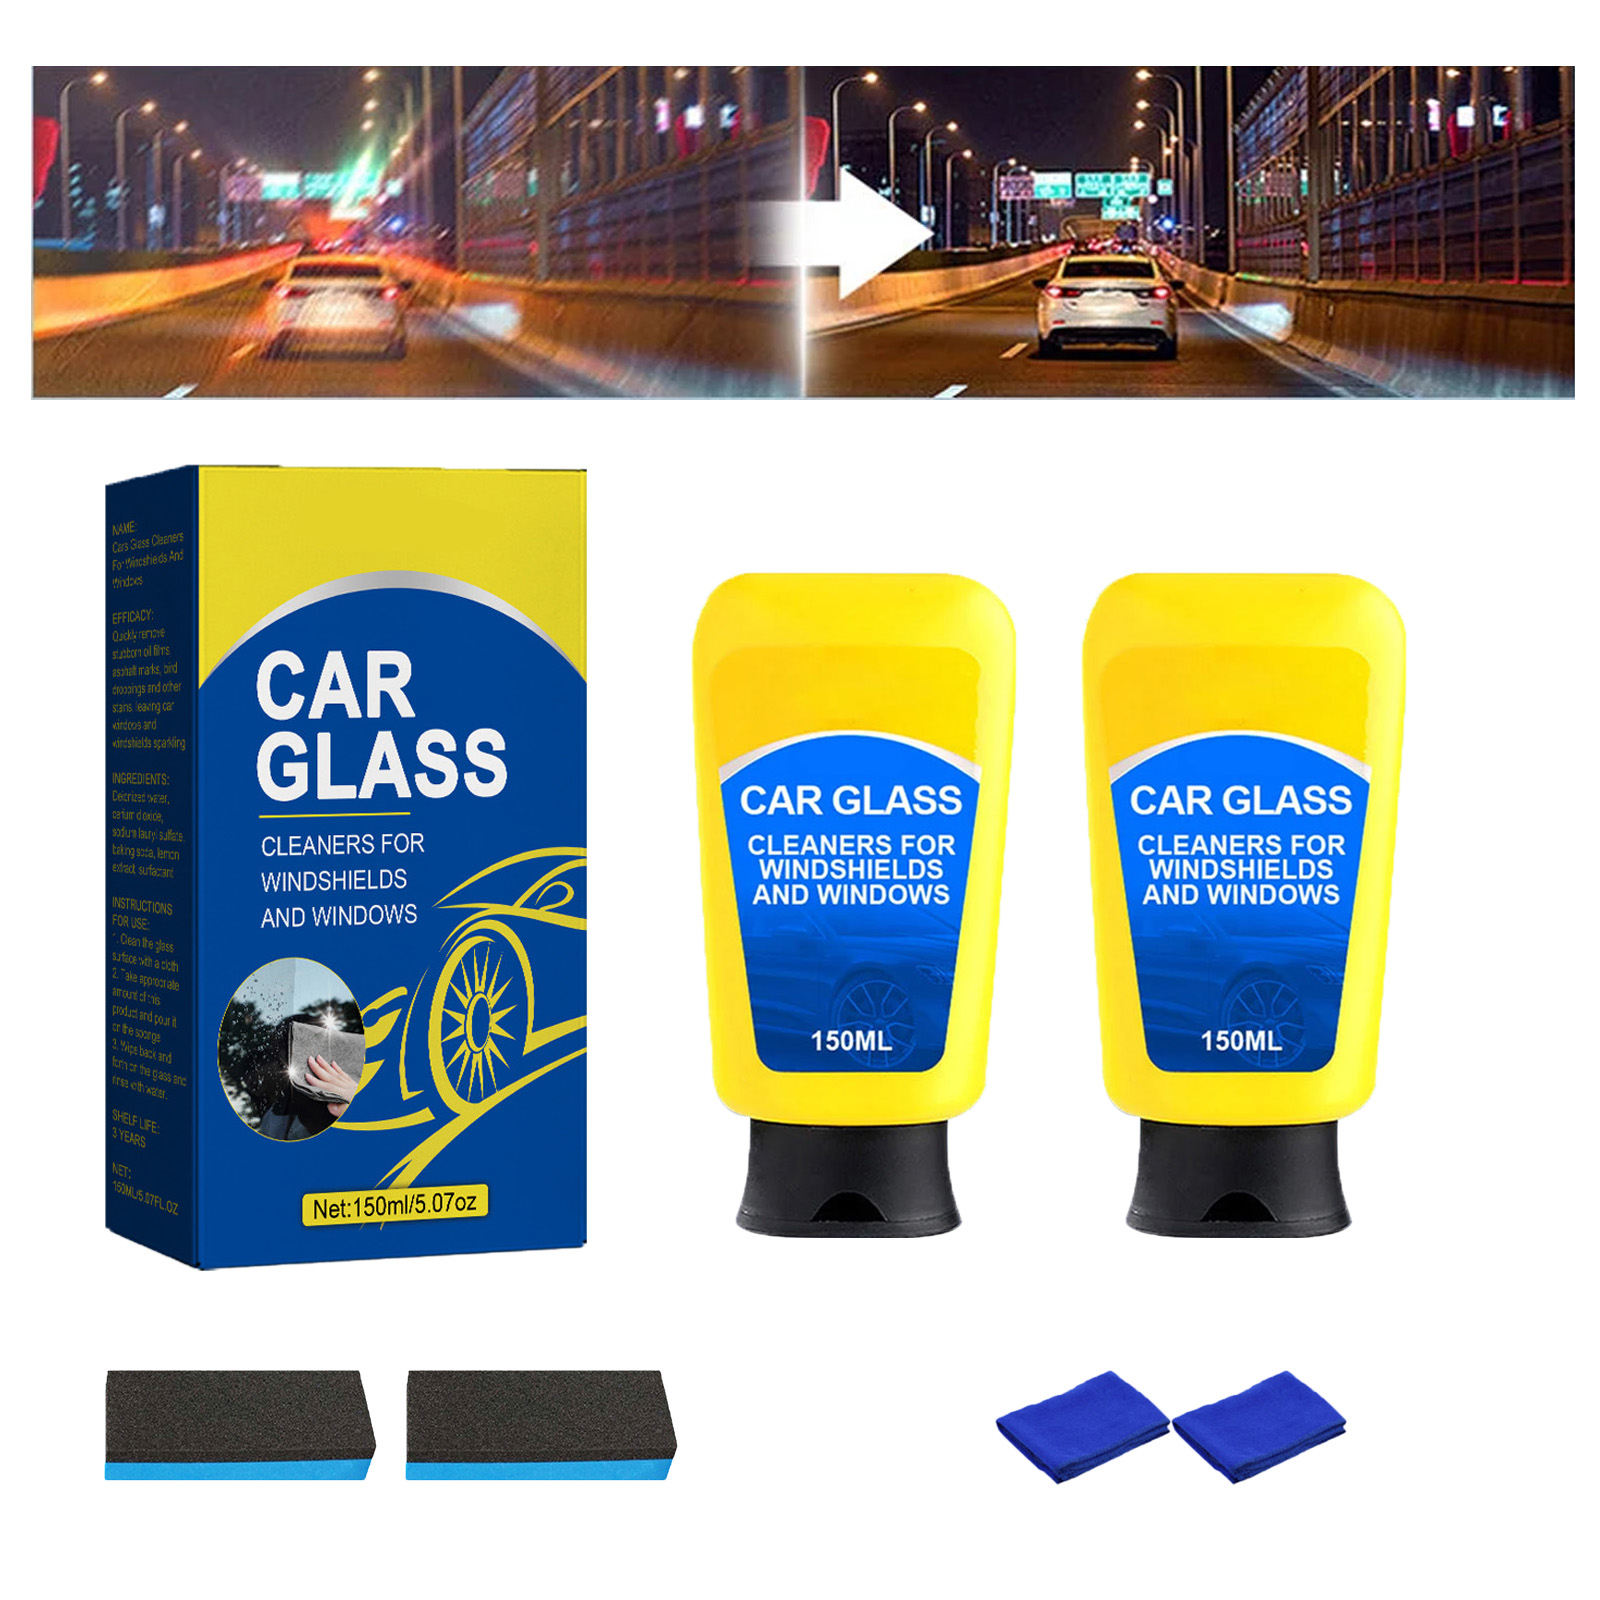 Car Glass Oil Film Cleaner, Sopami Car Coating Spray, Sopami Oil Film  Emulsion Glass Cleaner Sopami Quick Effect Coating Agent, Waterless Wash  Car